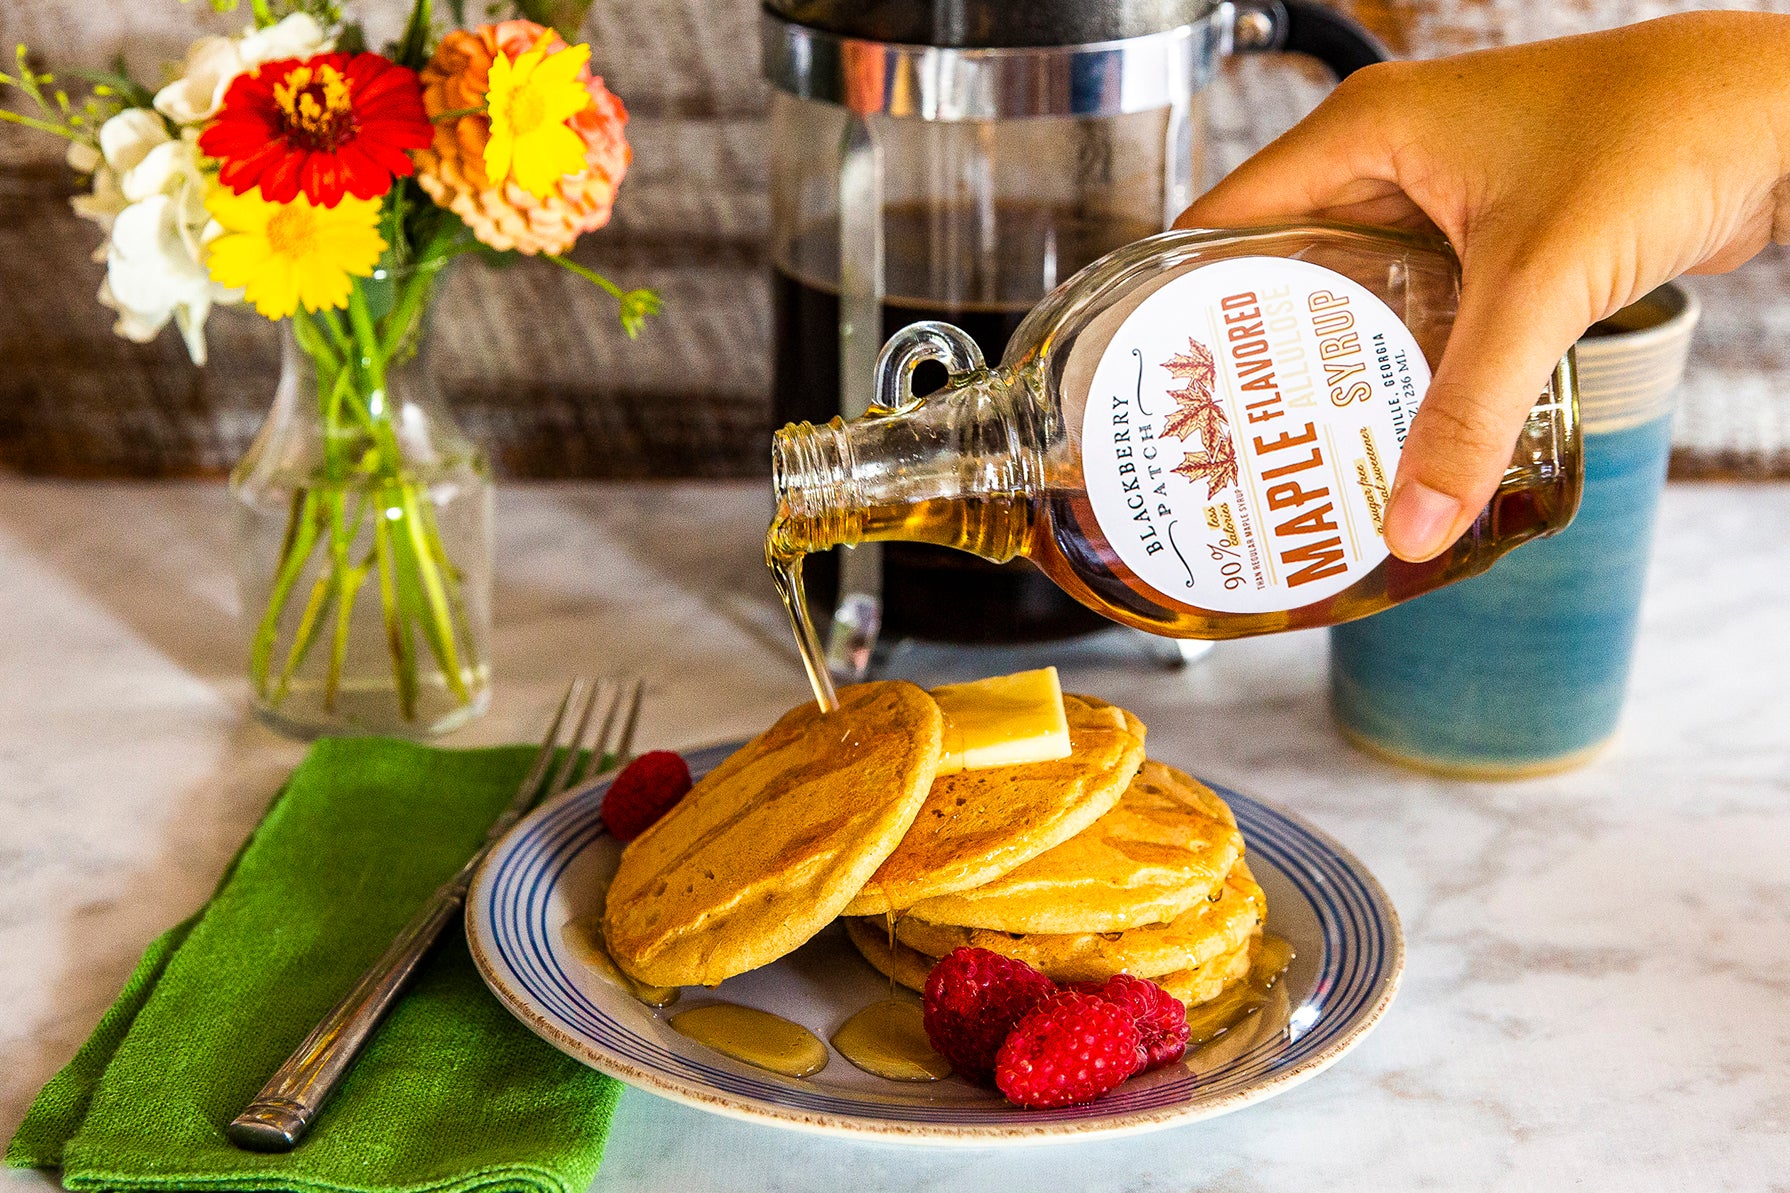 Recipe photo of Oatmeal Pancakes using Blackberry Patch Maple Flavored Allulose Syrup